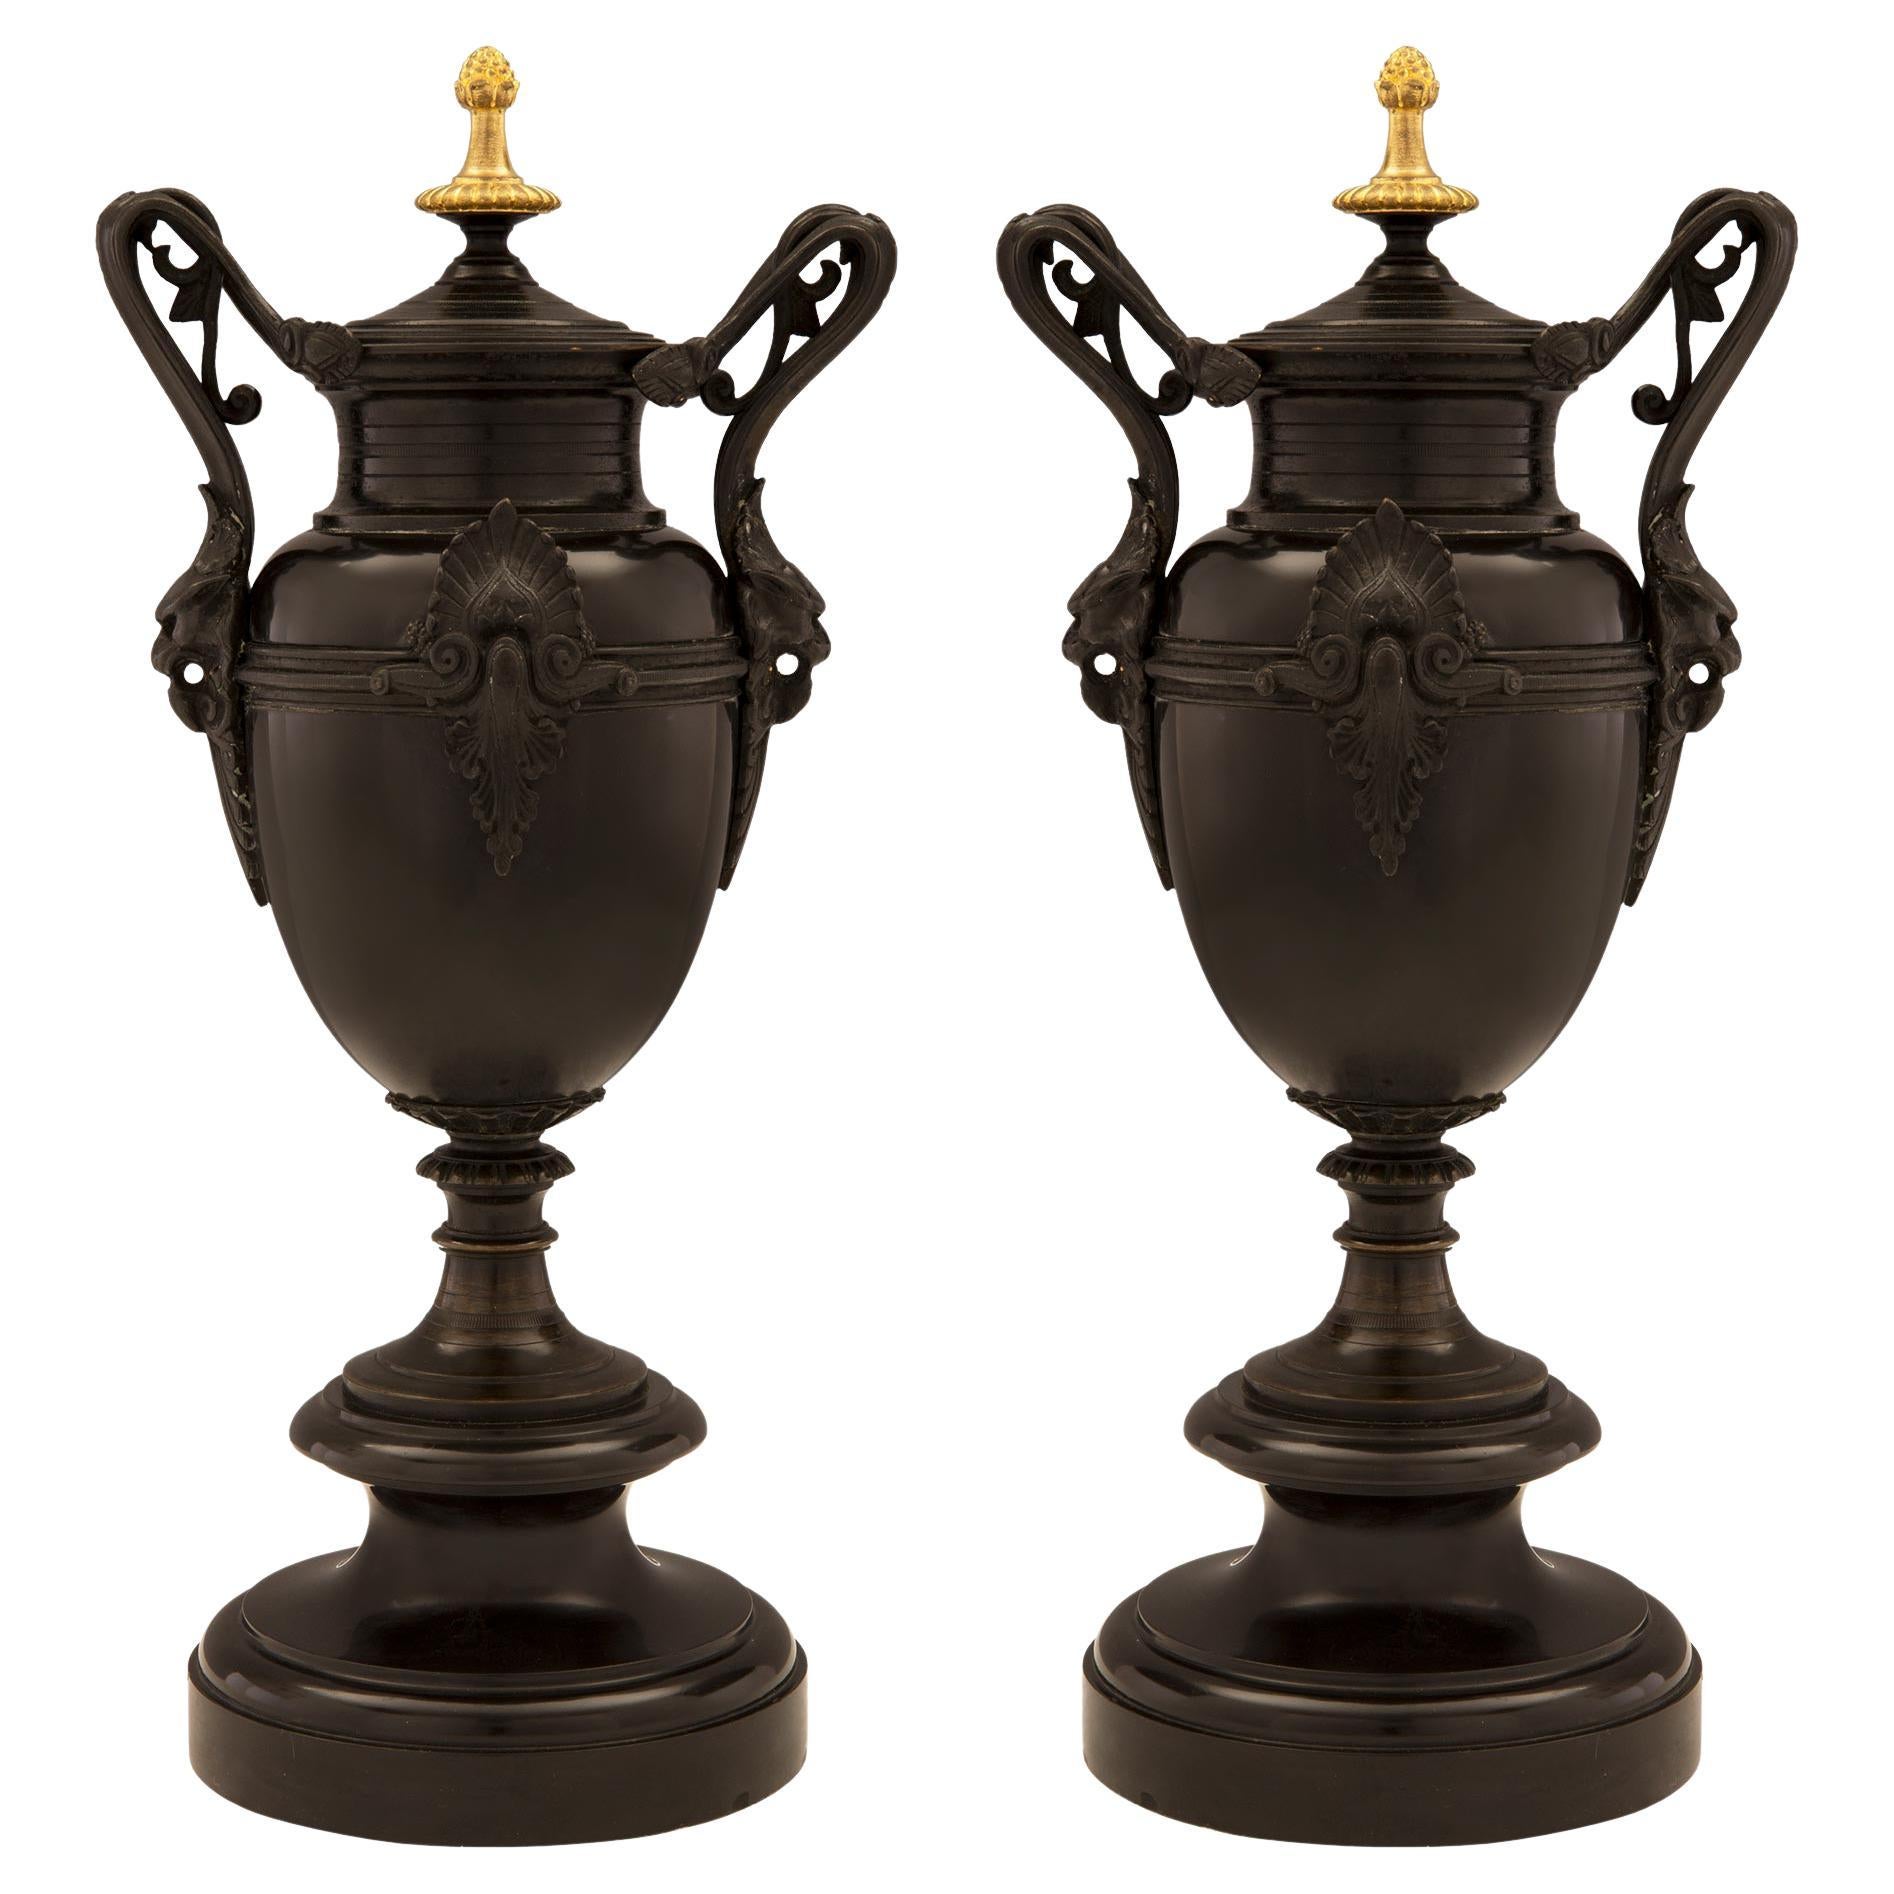 Pair of French 19th Century Renaissance Style Patinated Bronze and Ormolu Urns